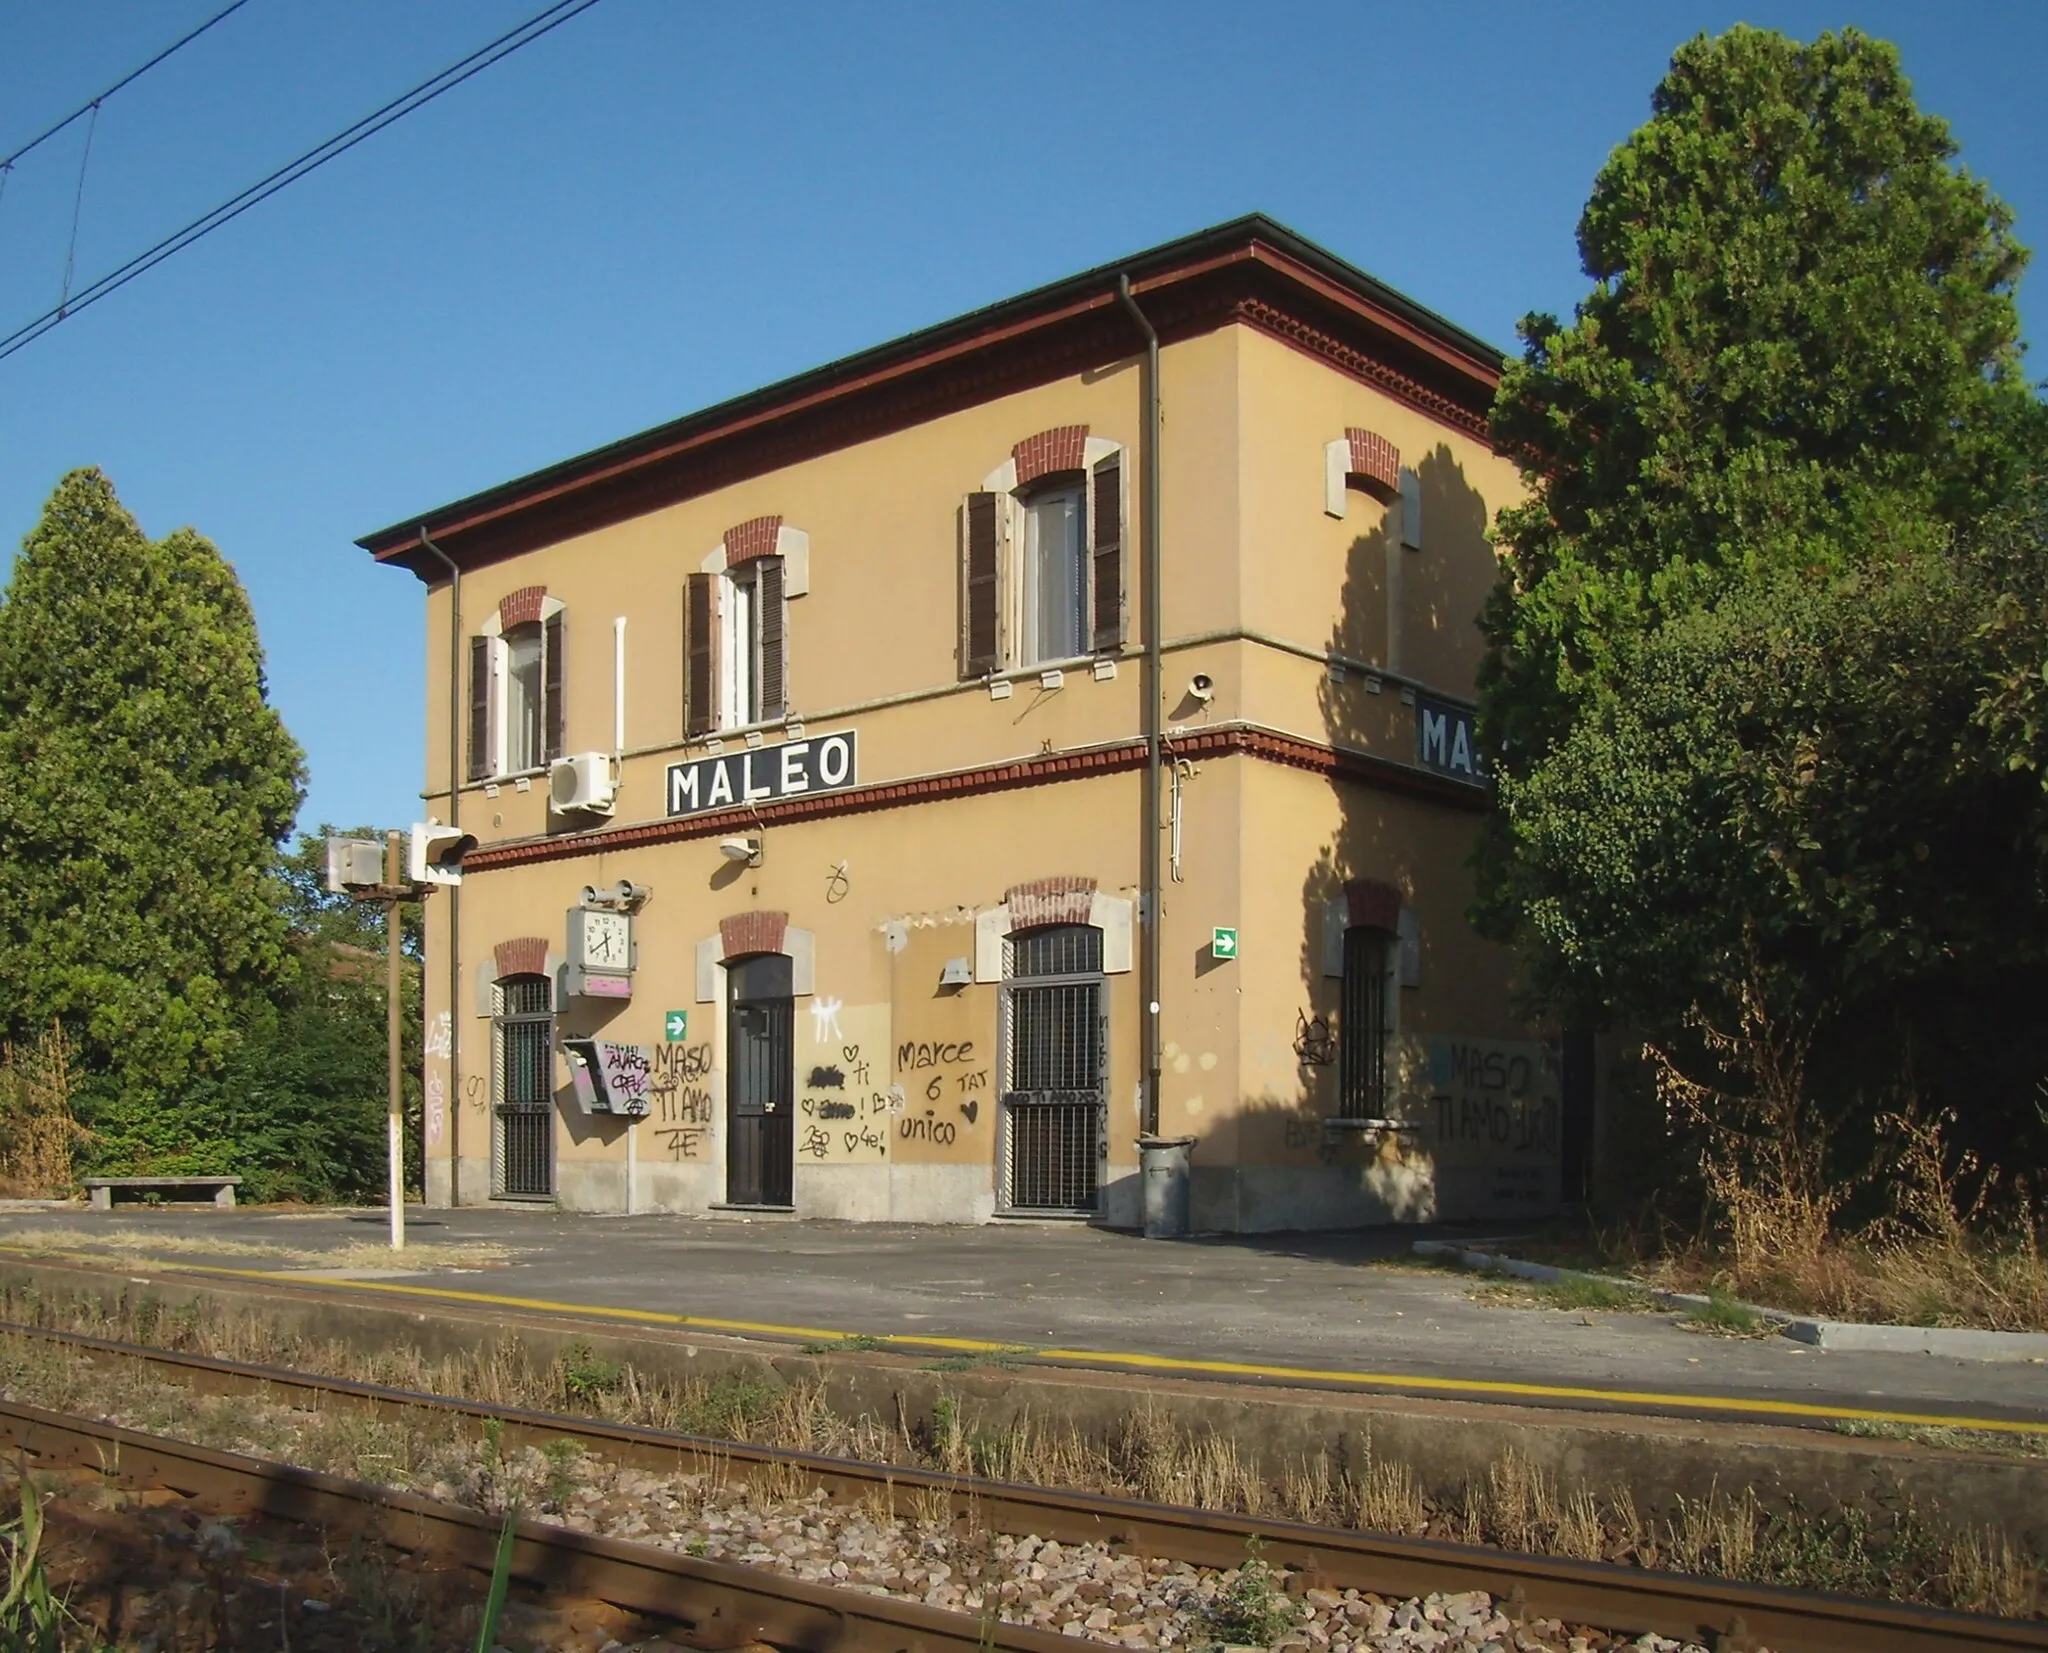 Photo showing: Railway station in Maleo (LO), Italy